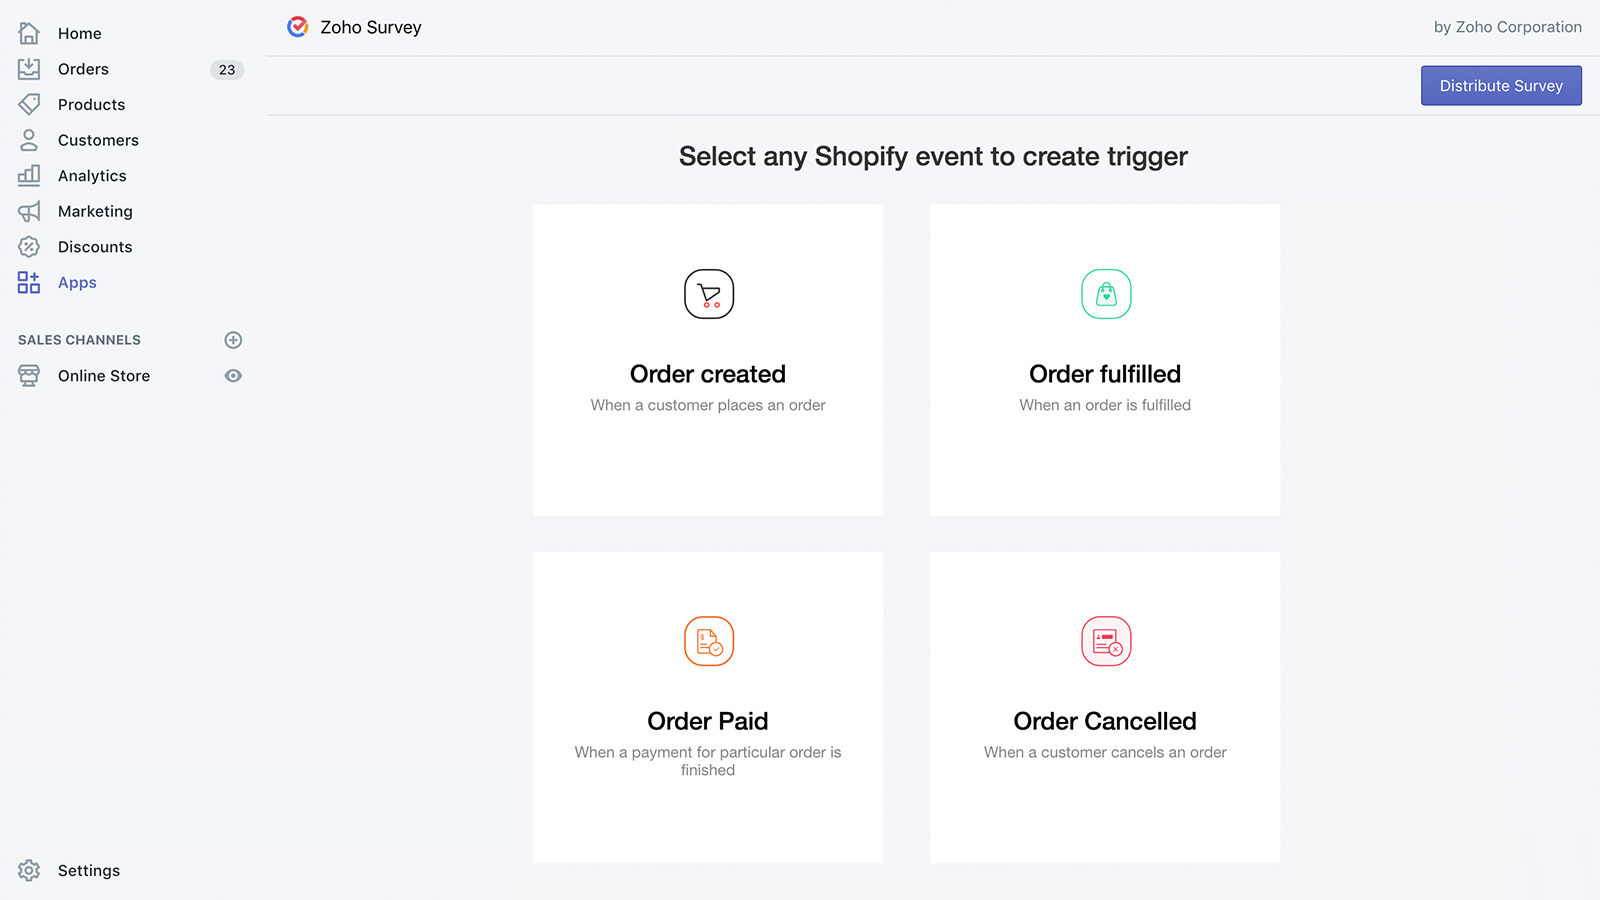 Create triggers to automatically send surveys for Shopify events